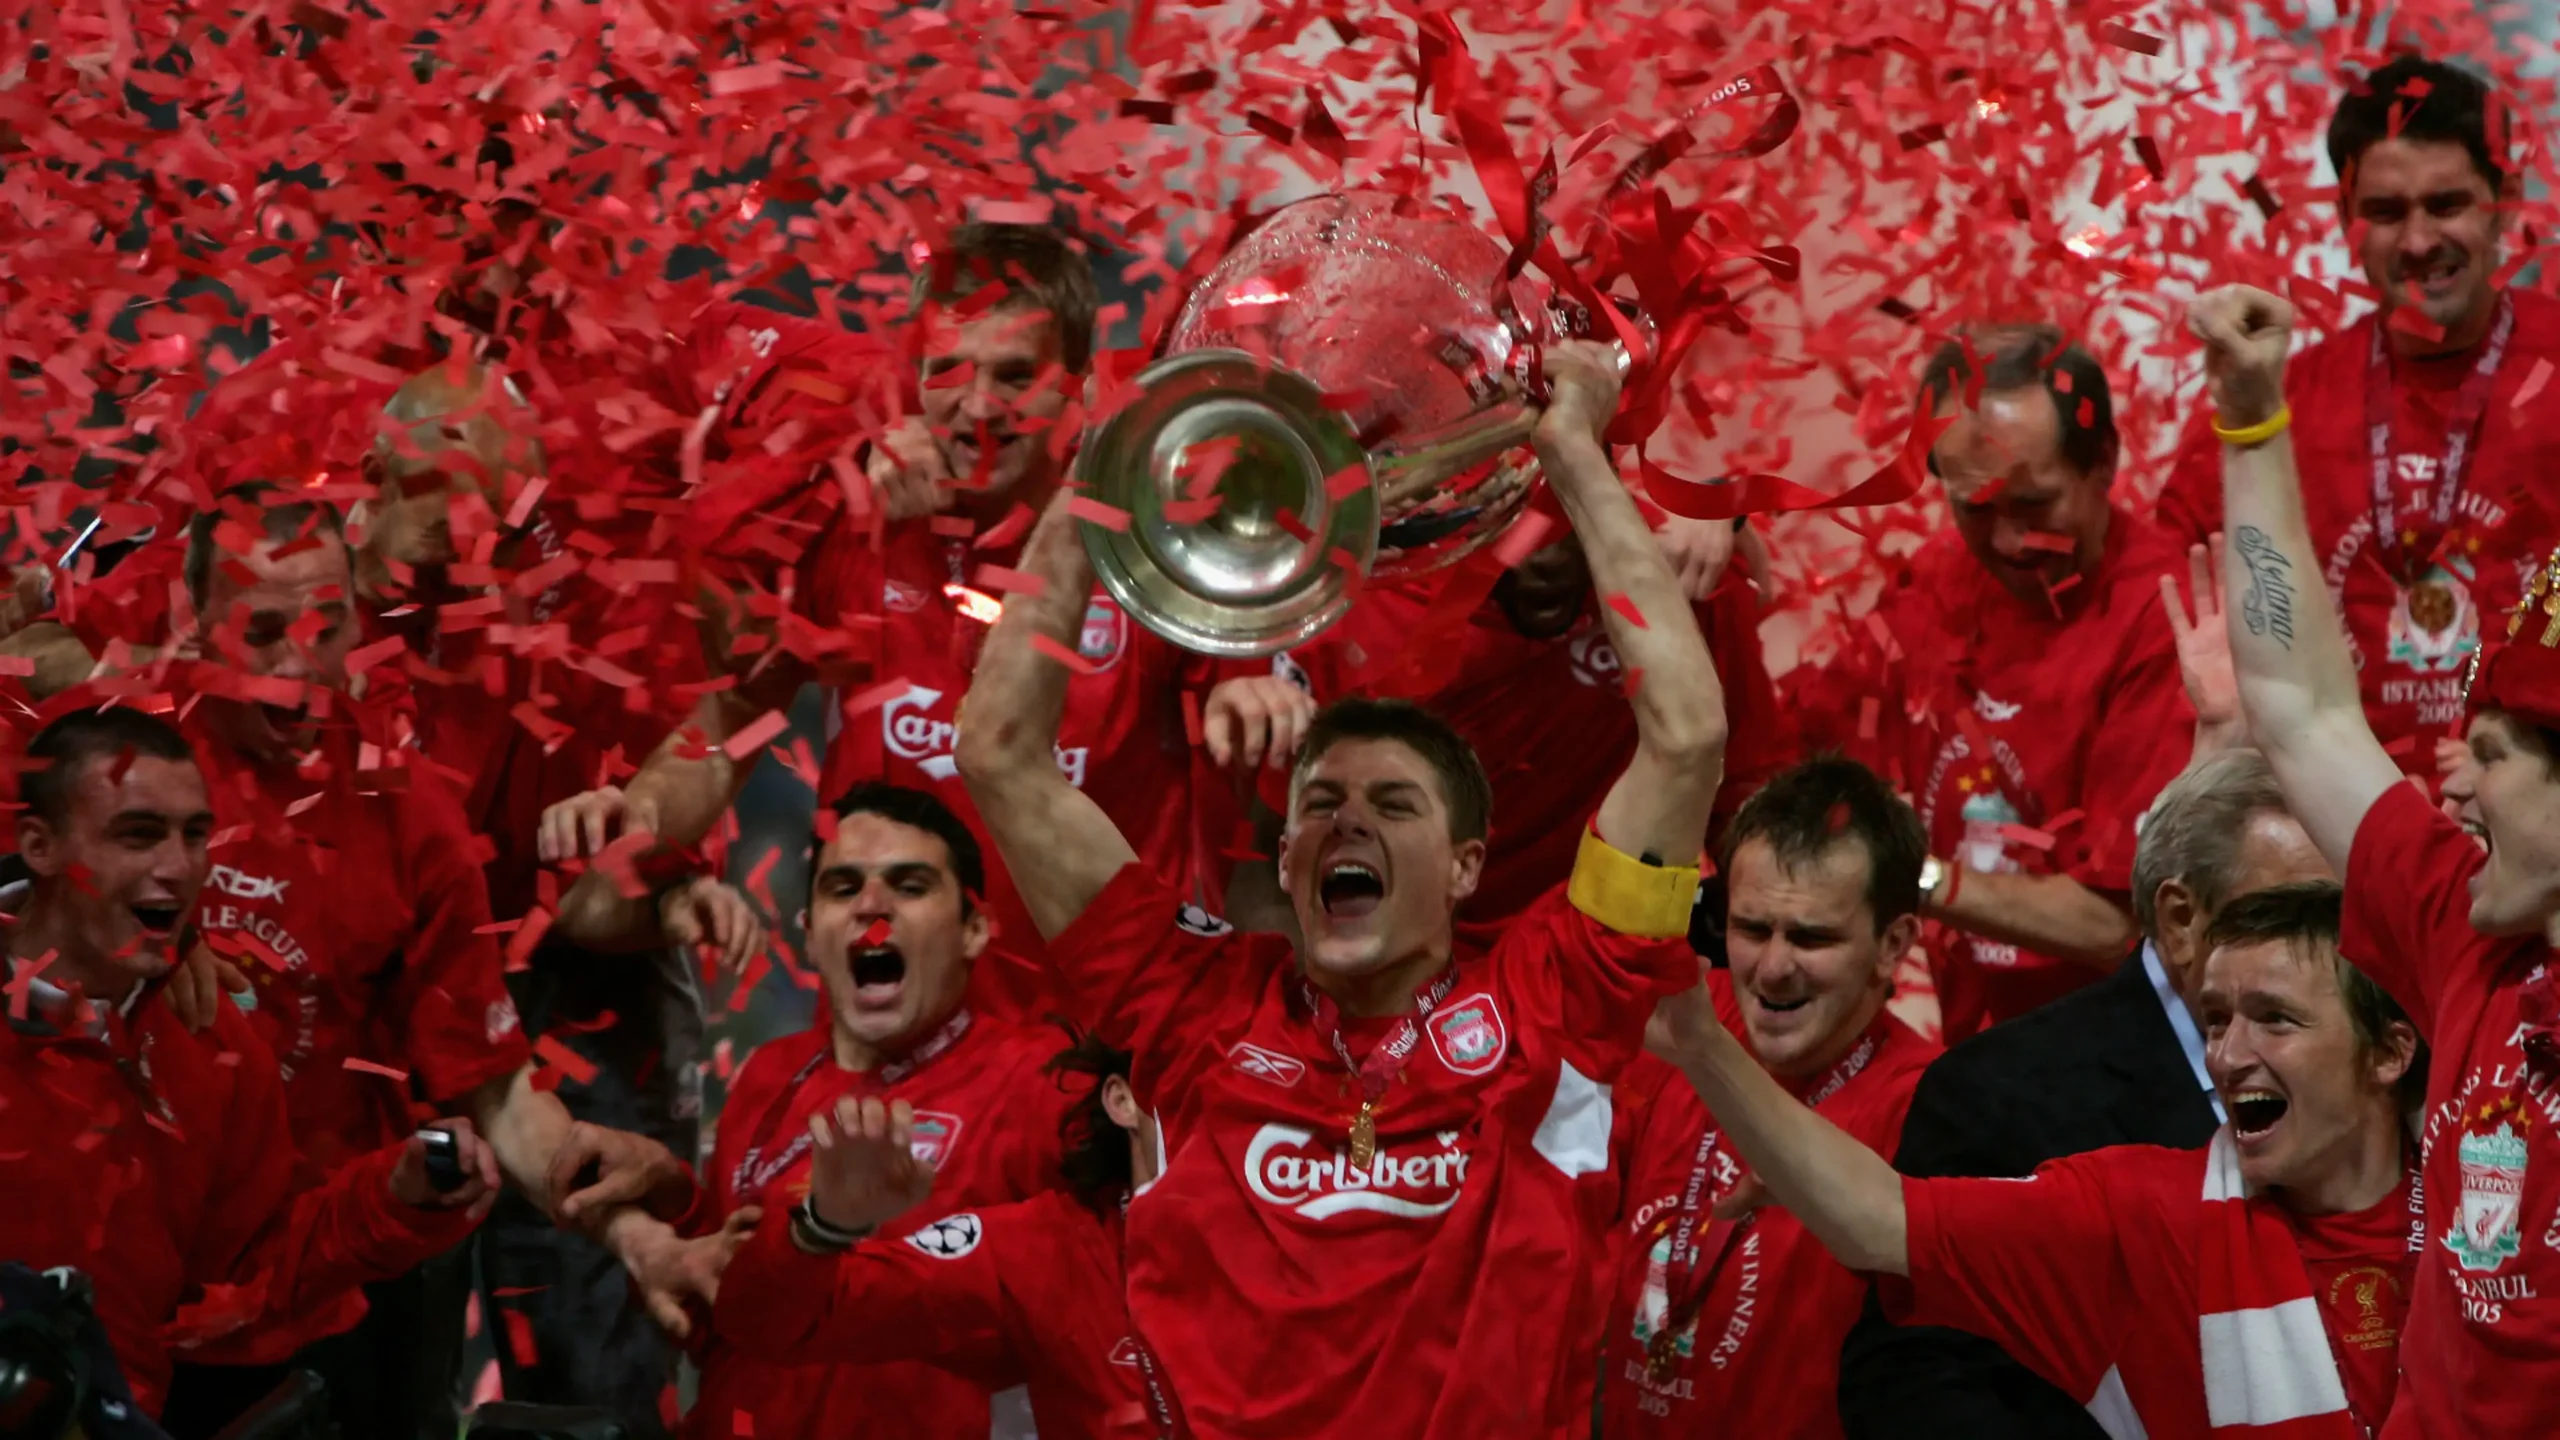 Gerrard picks up the Champions League trophy after the Miracle of Istanbul